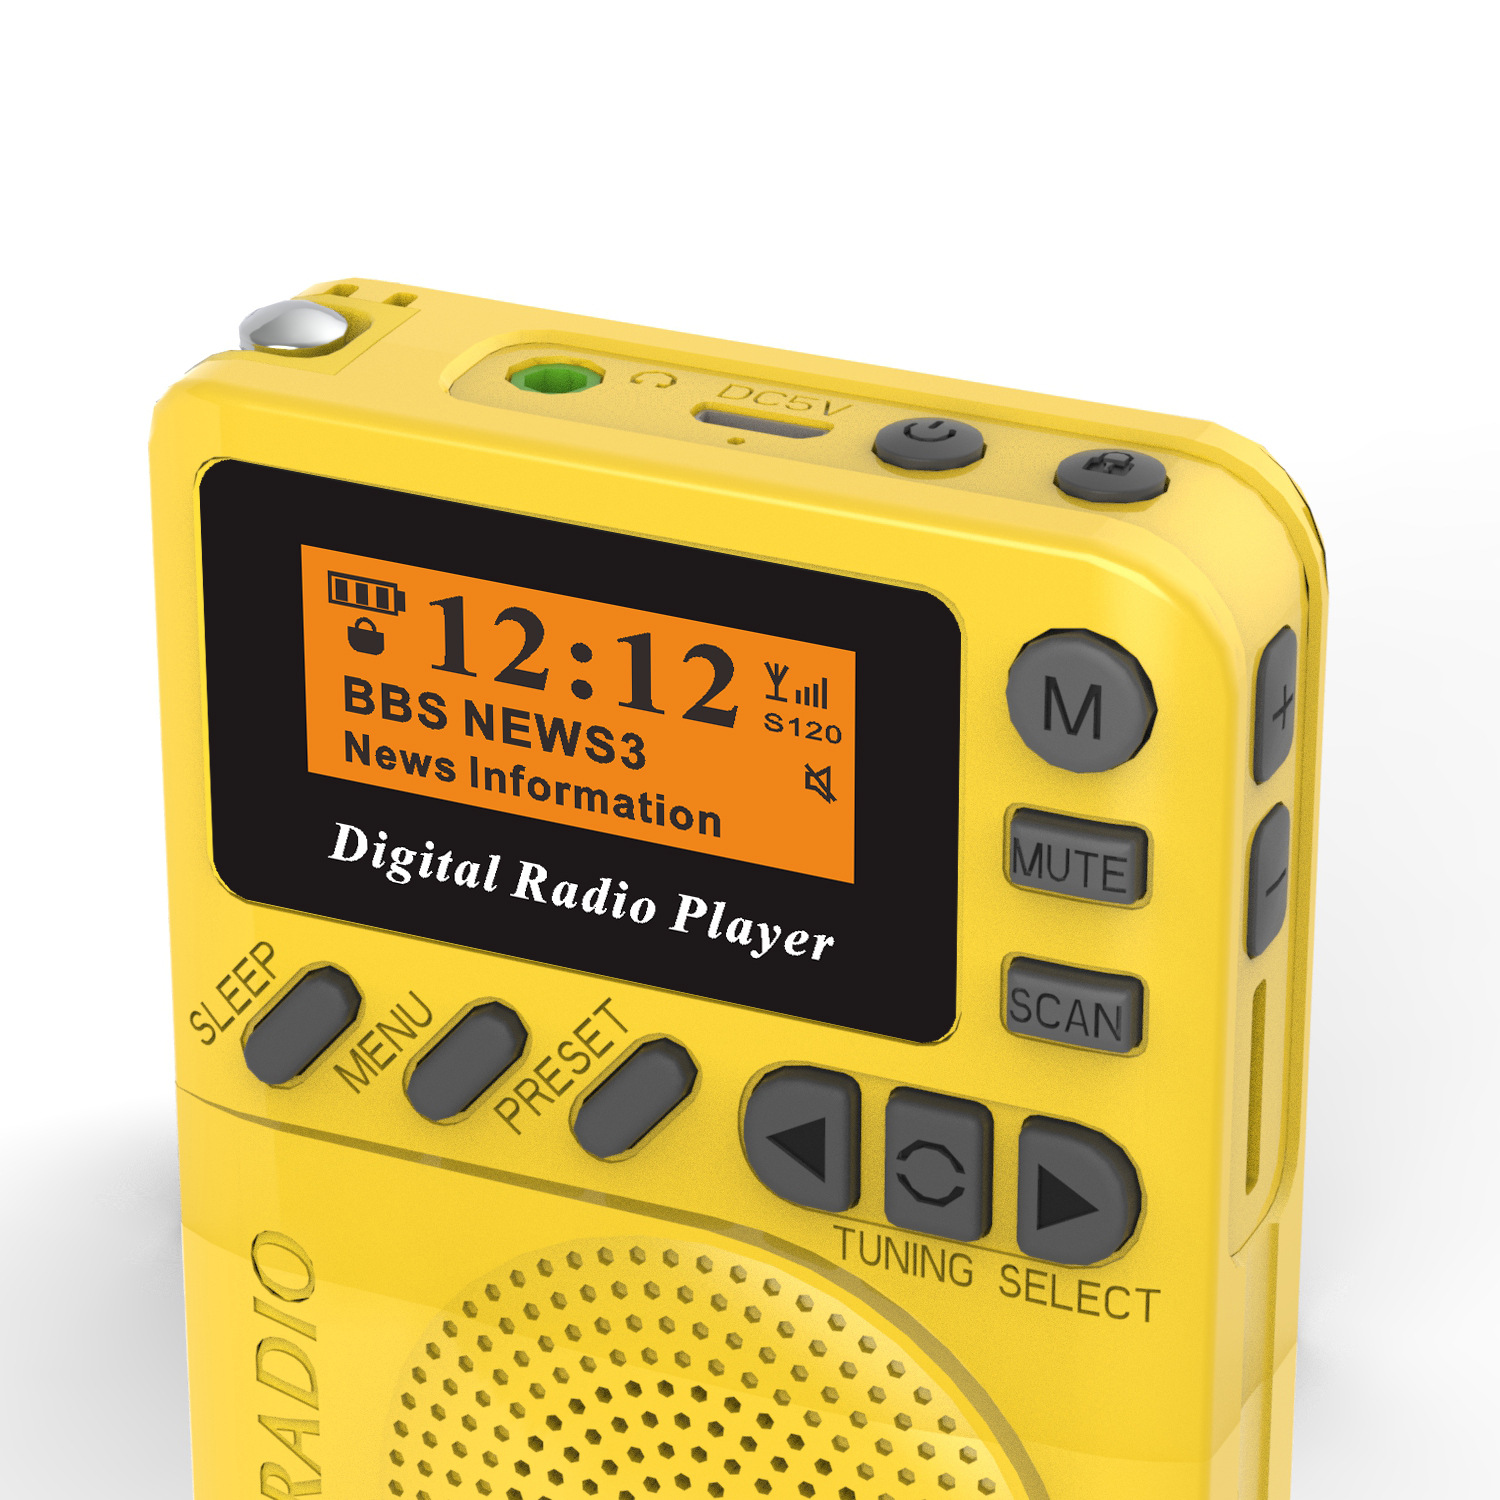 European Market FM| DAB Radio || Support TF Card MP3 Playback|Built-in Rechargeable Battery For Long Battery Life